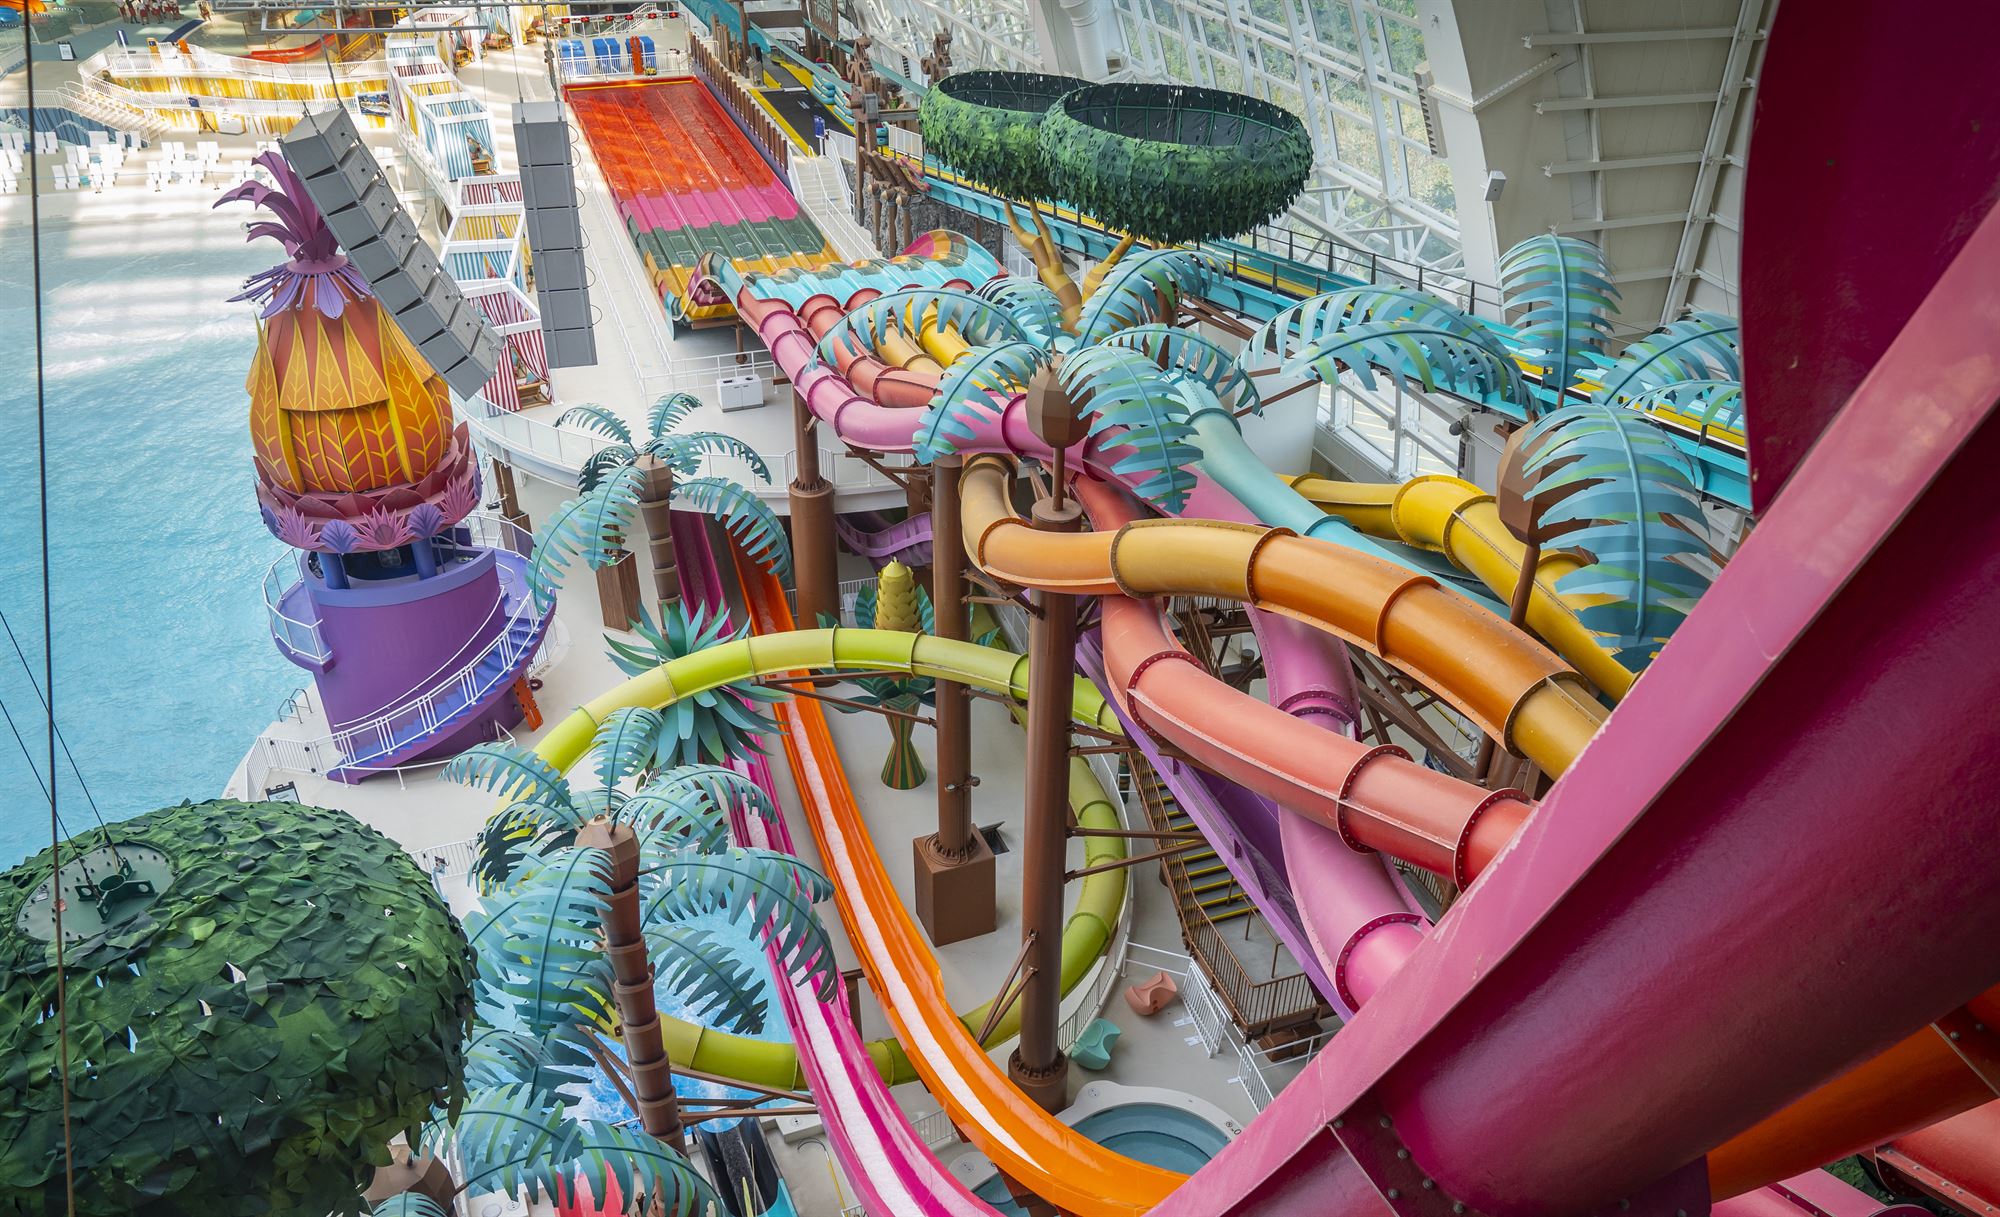 10 Best Indoor Amusement Parks in the US To Experience Thrills Year Round